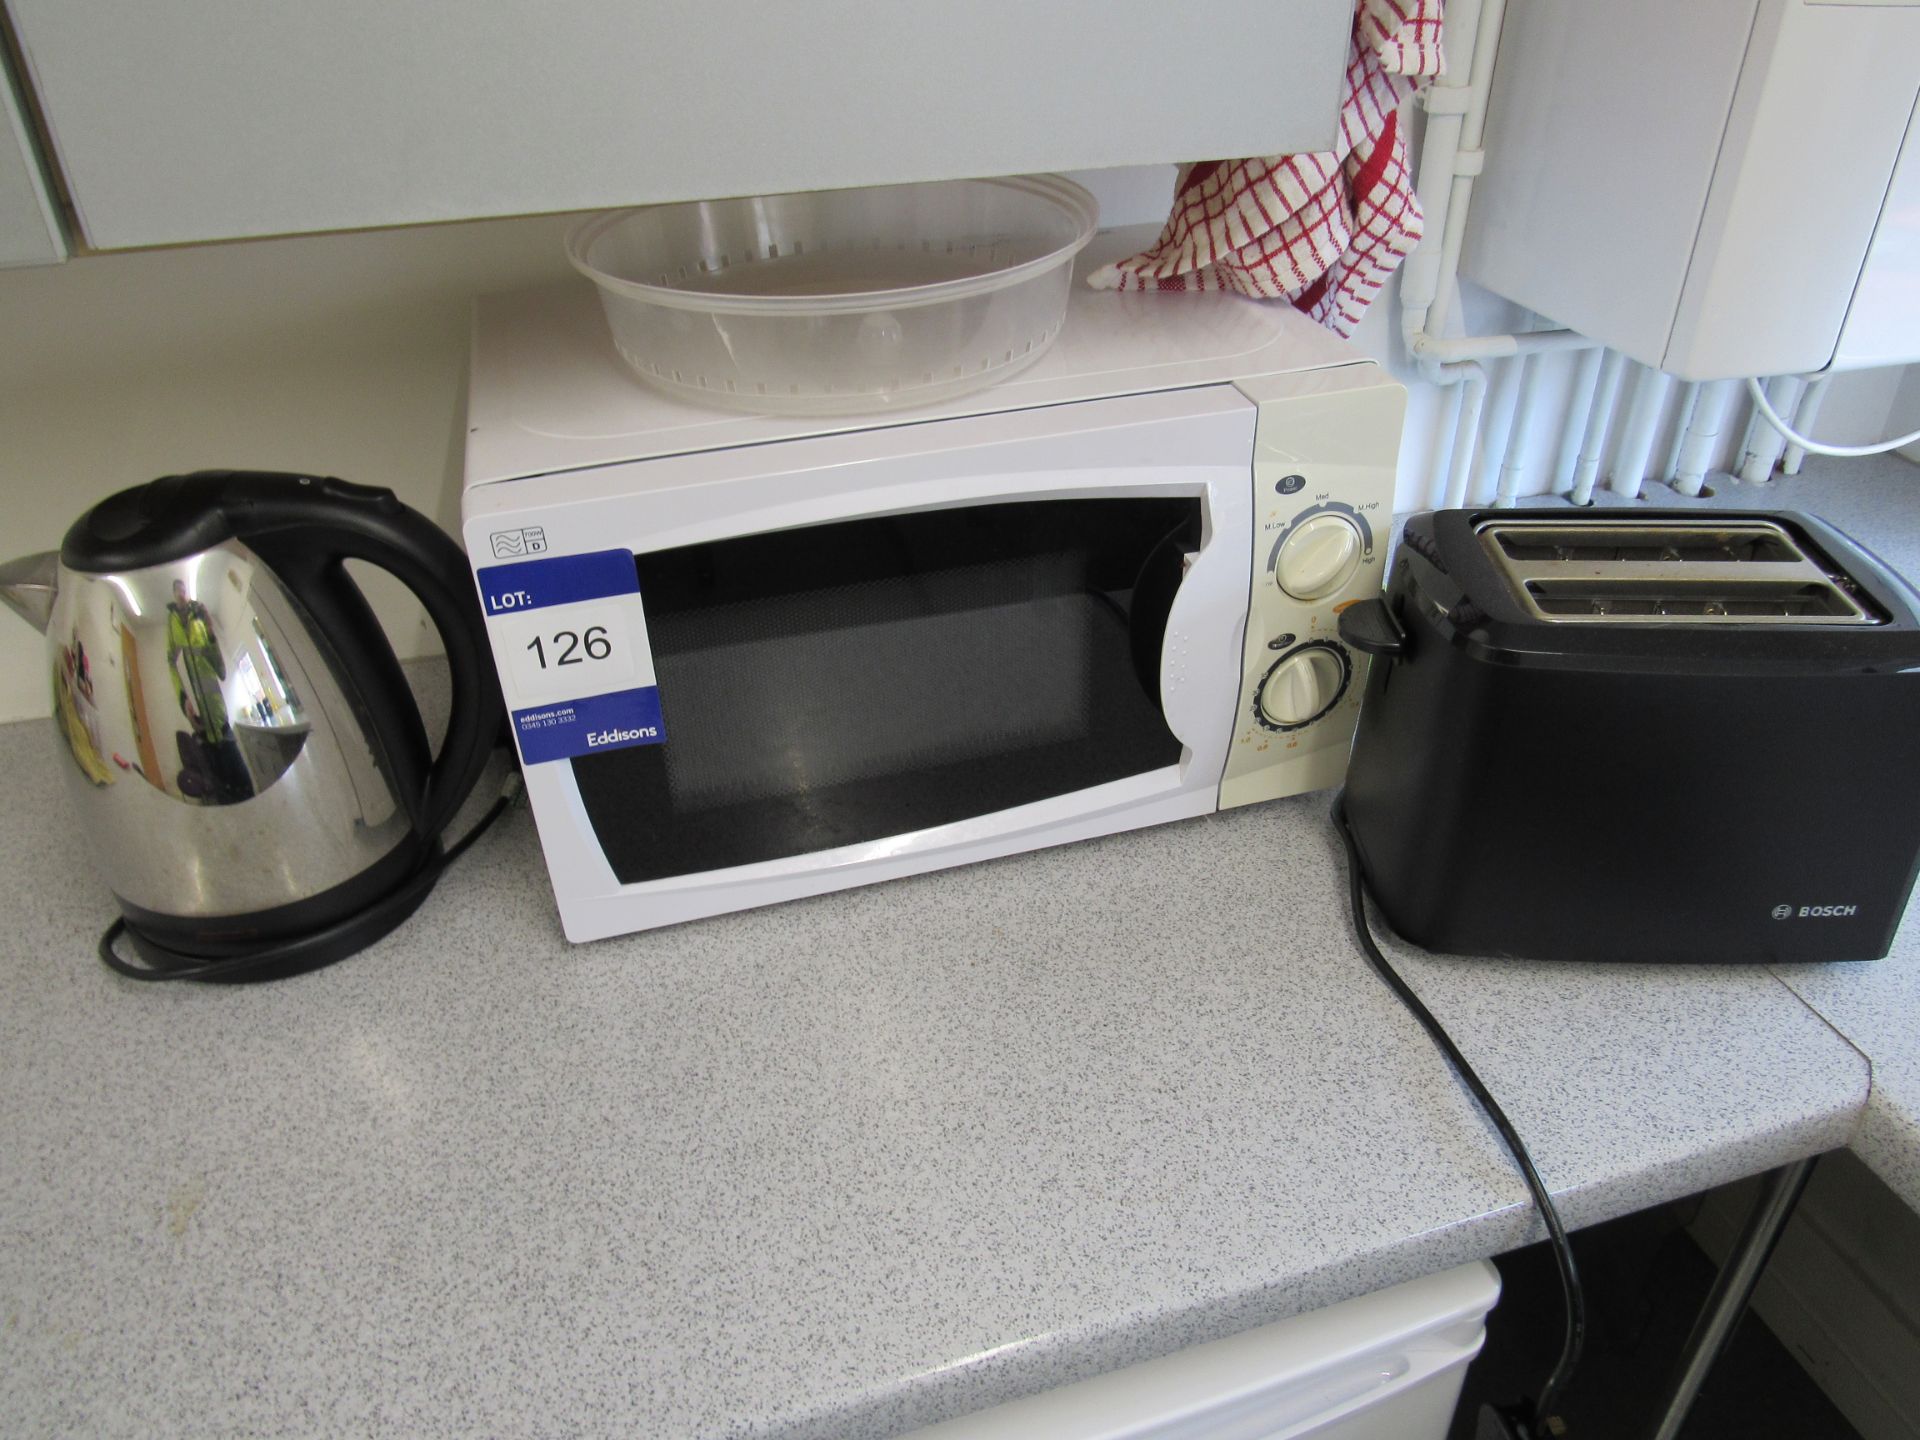 Microwave, Kettle and Toaster